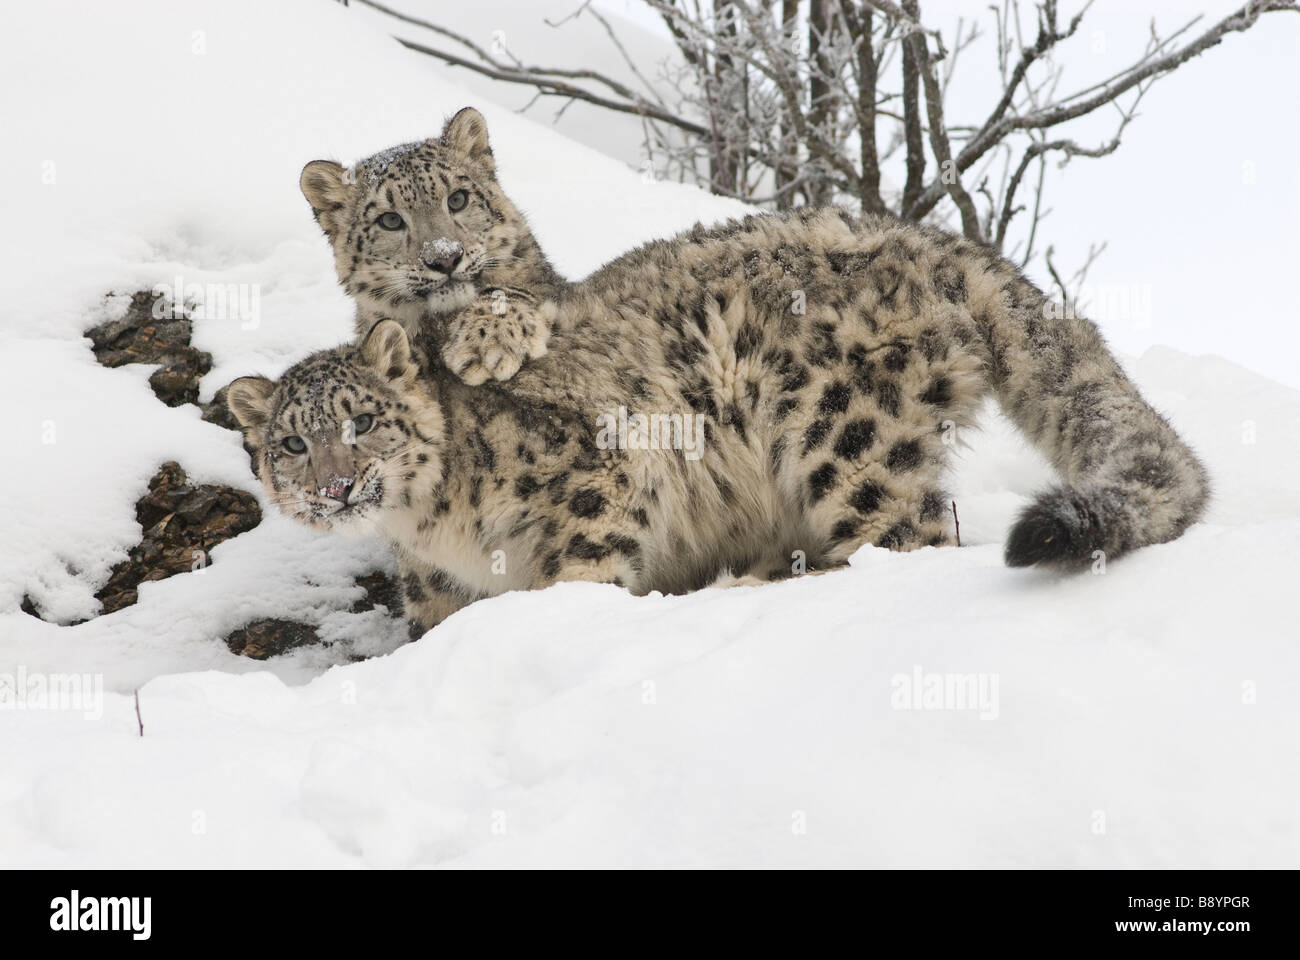 Snow leopard panthera uncia controlled conditions Stock Photo